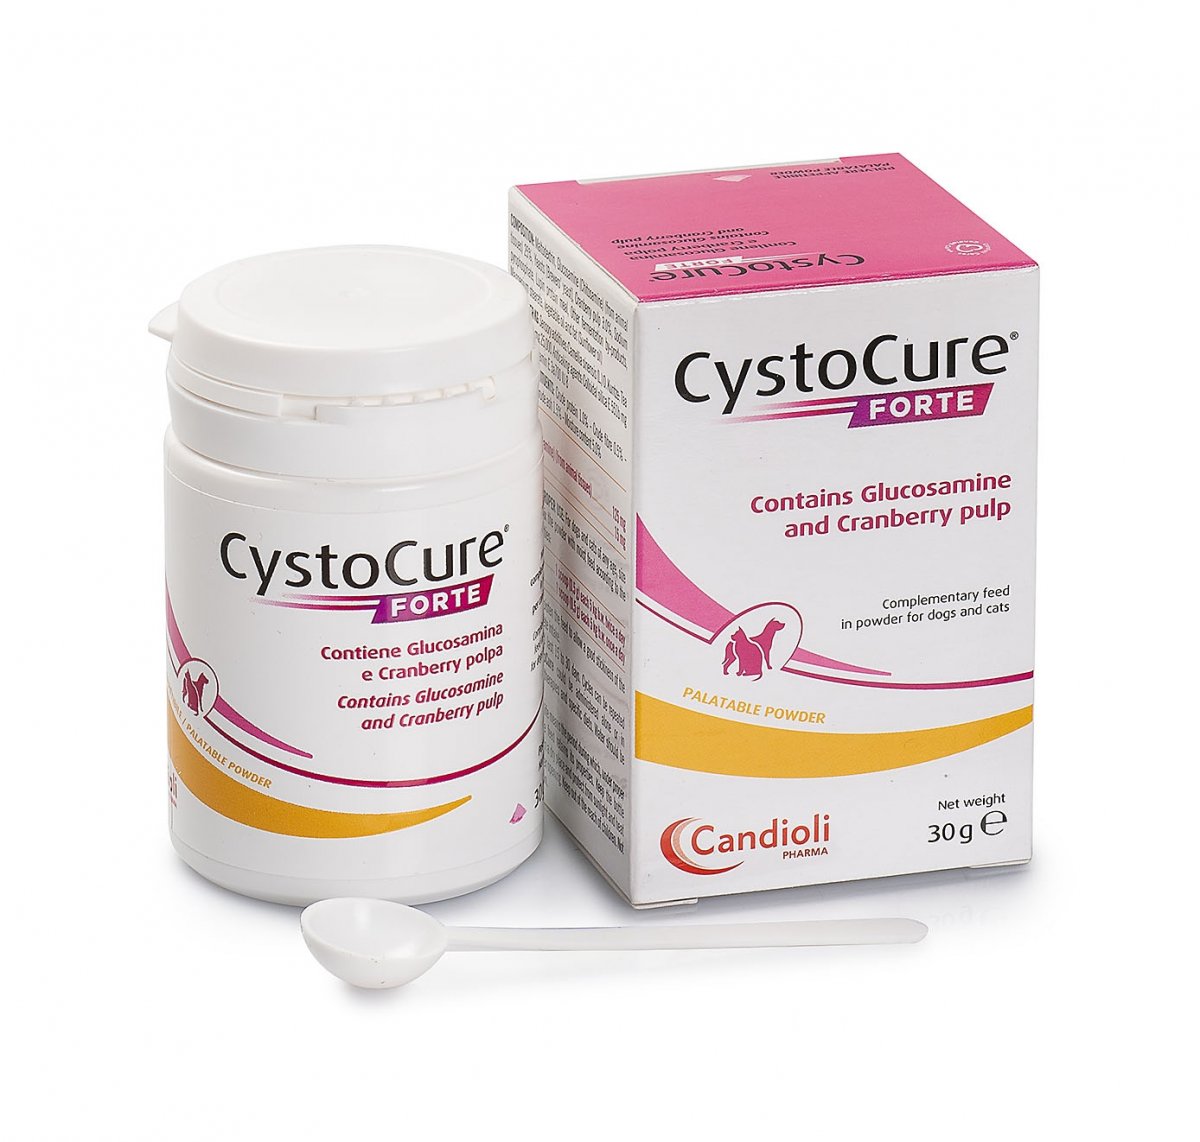 Cystocure forte pó